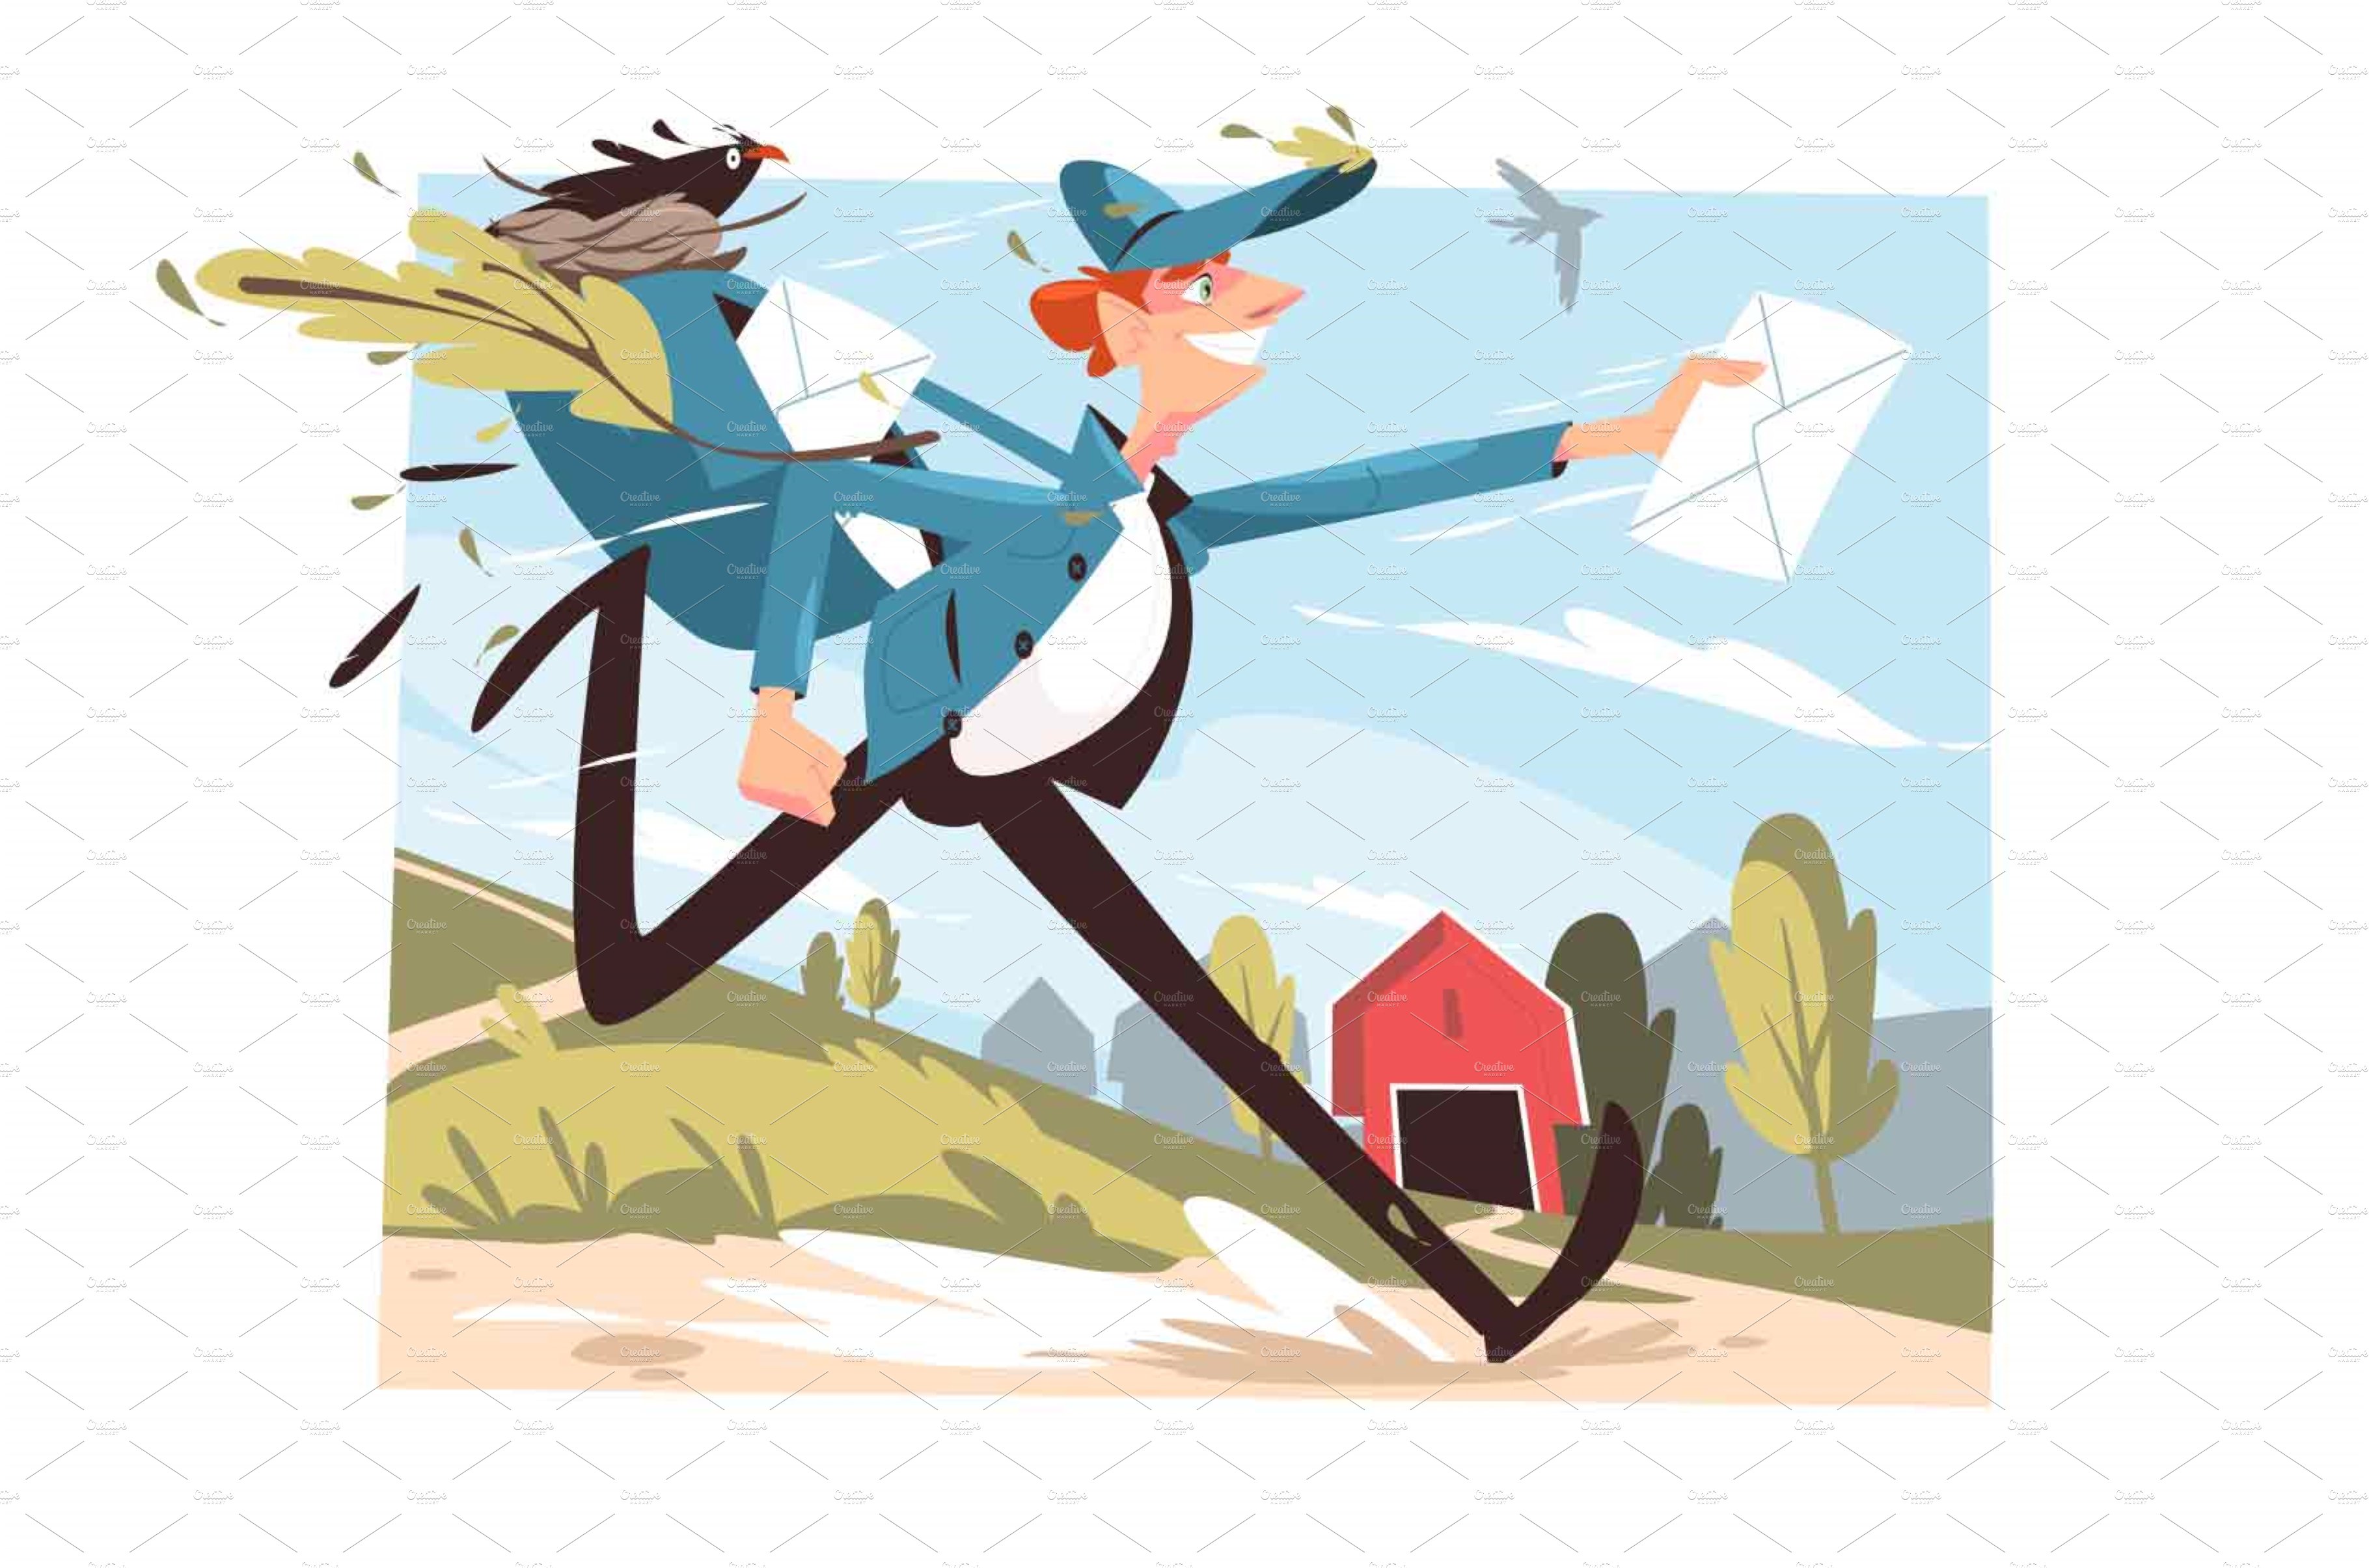 Postman hurrying to deliver letter cover image.